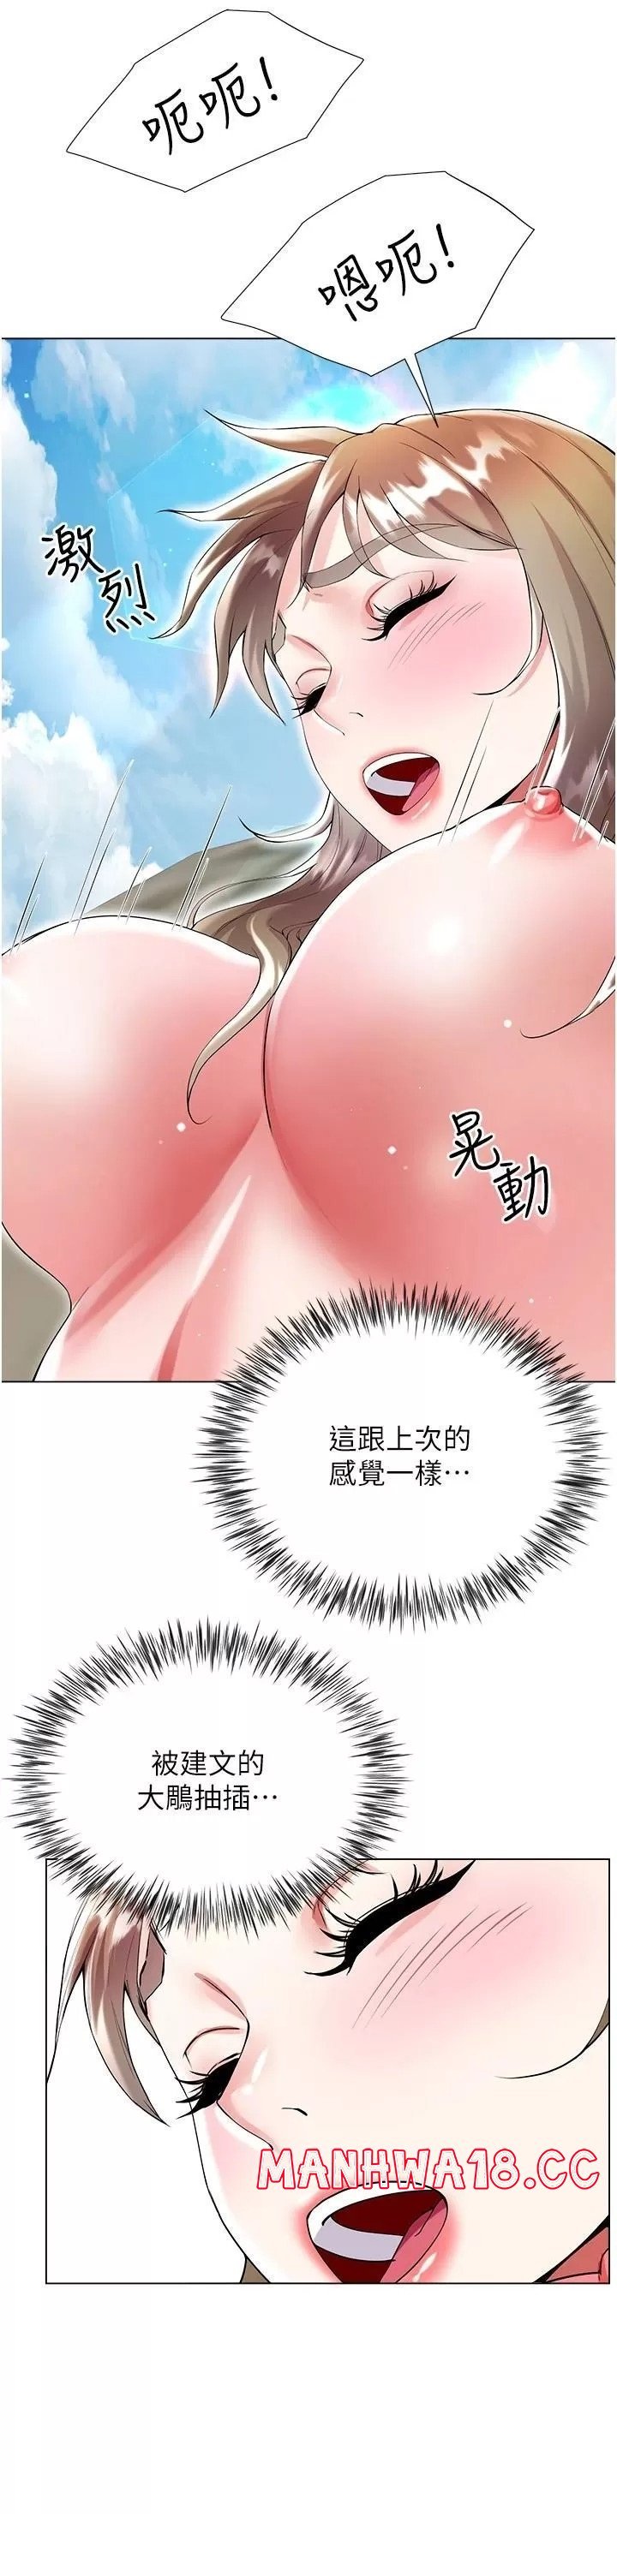 skirt-of-brothers-wife-raw-chap-38-40